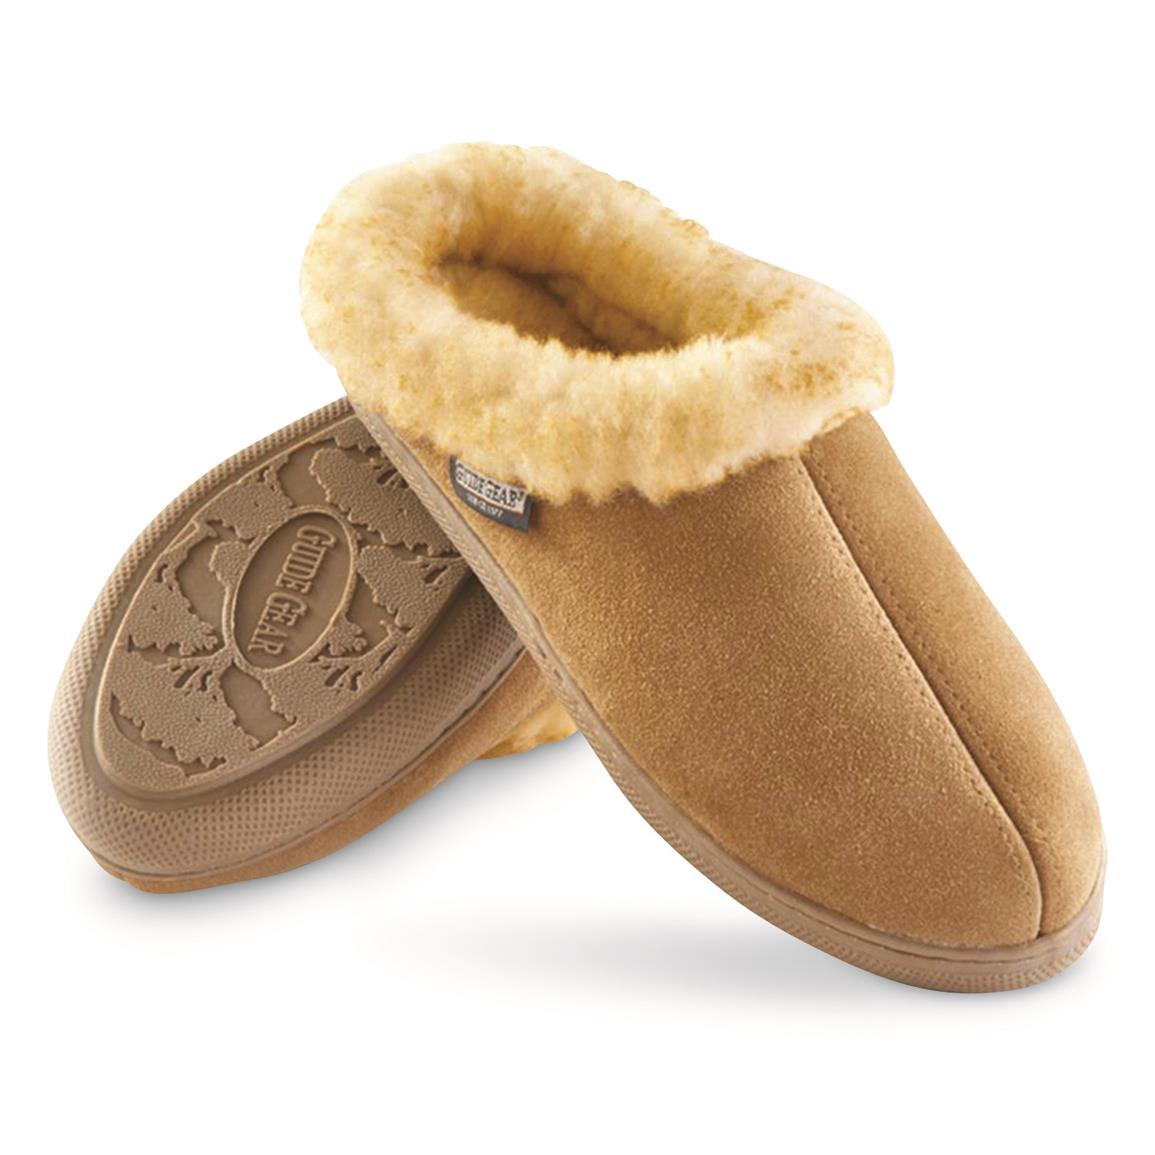 Guide Gear Women's Suede Clog Slippers 